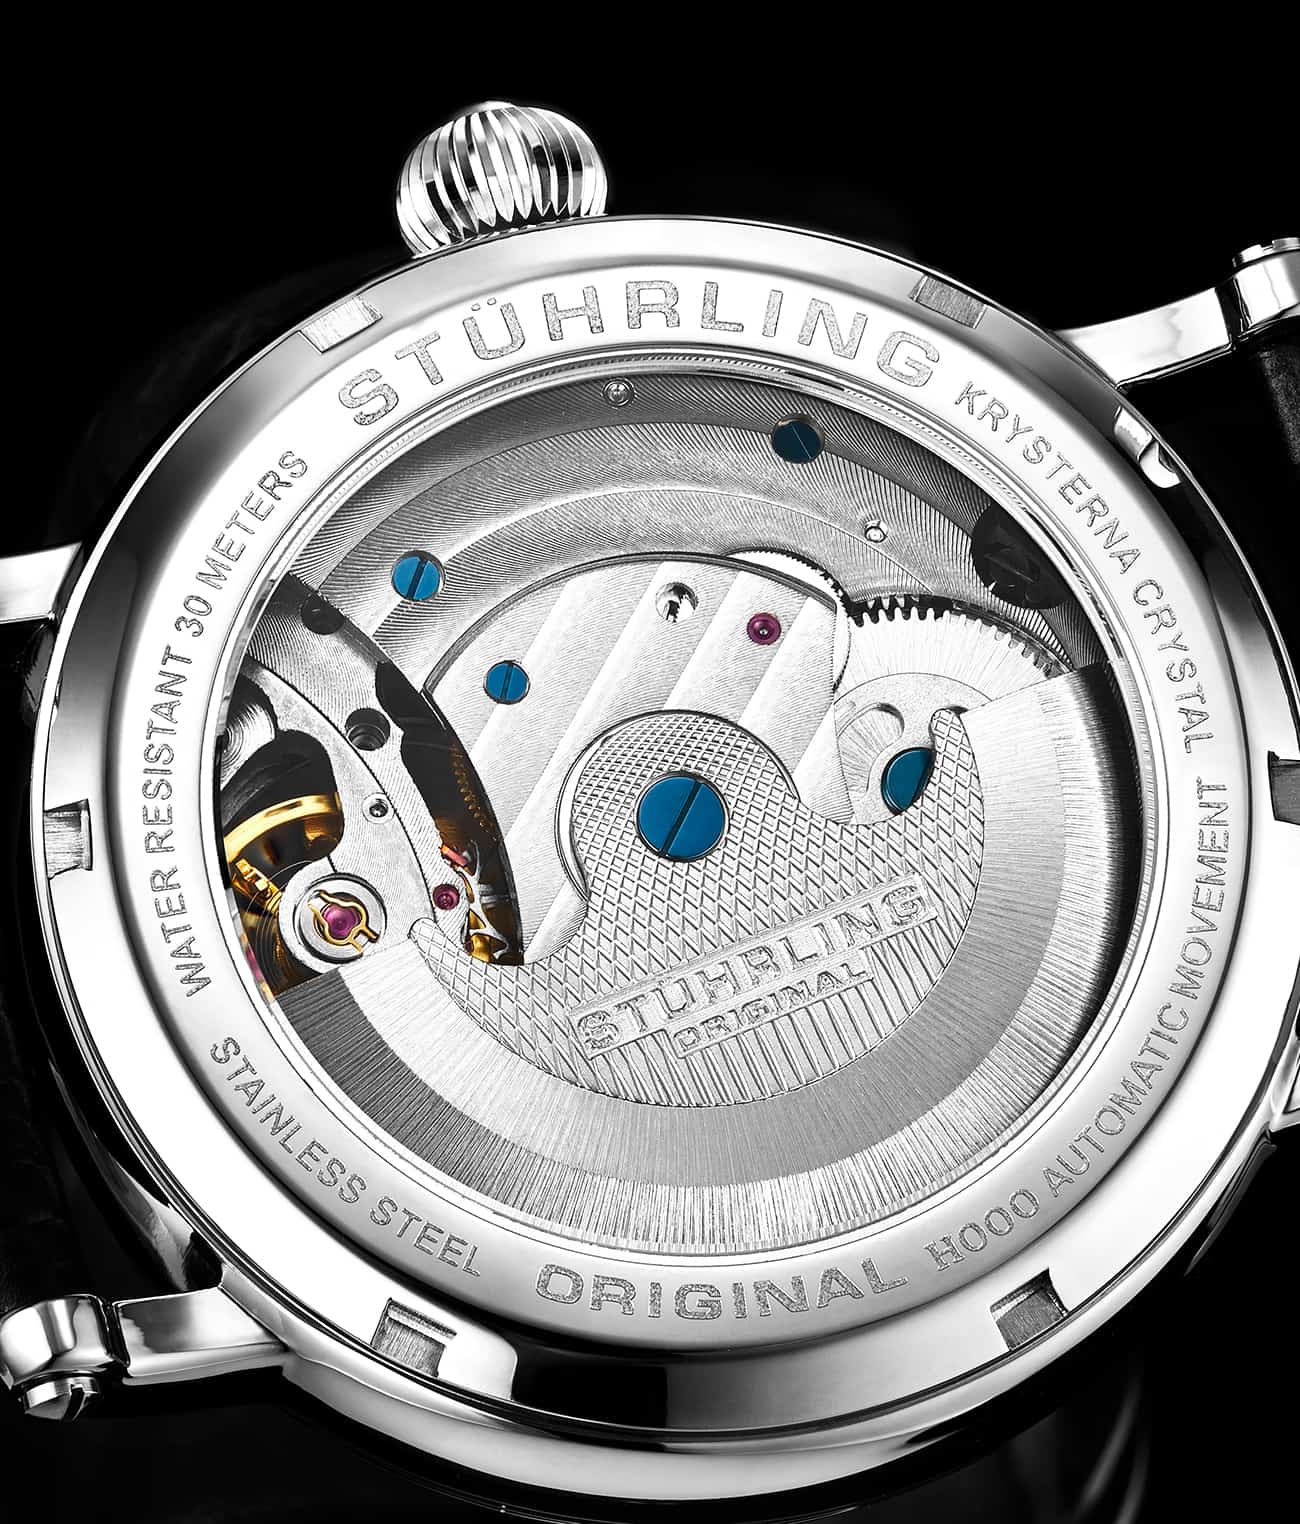 Macrocosm 4000 Automatic 43mm Skeleton with Dual Time